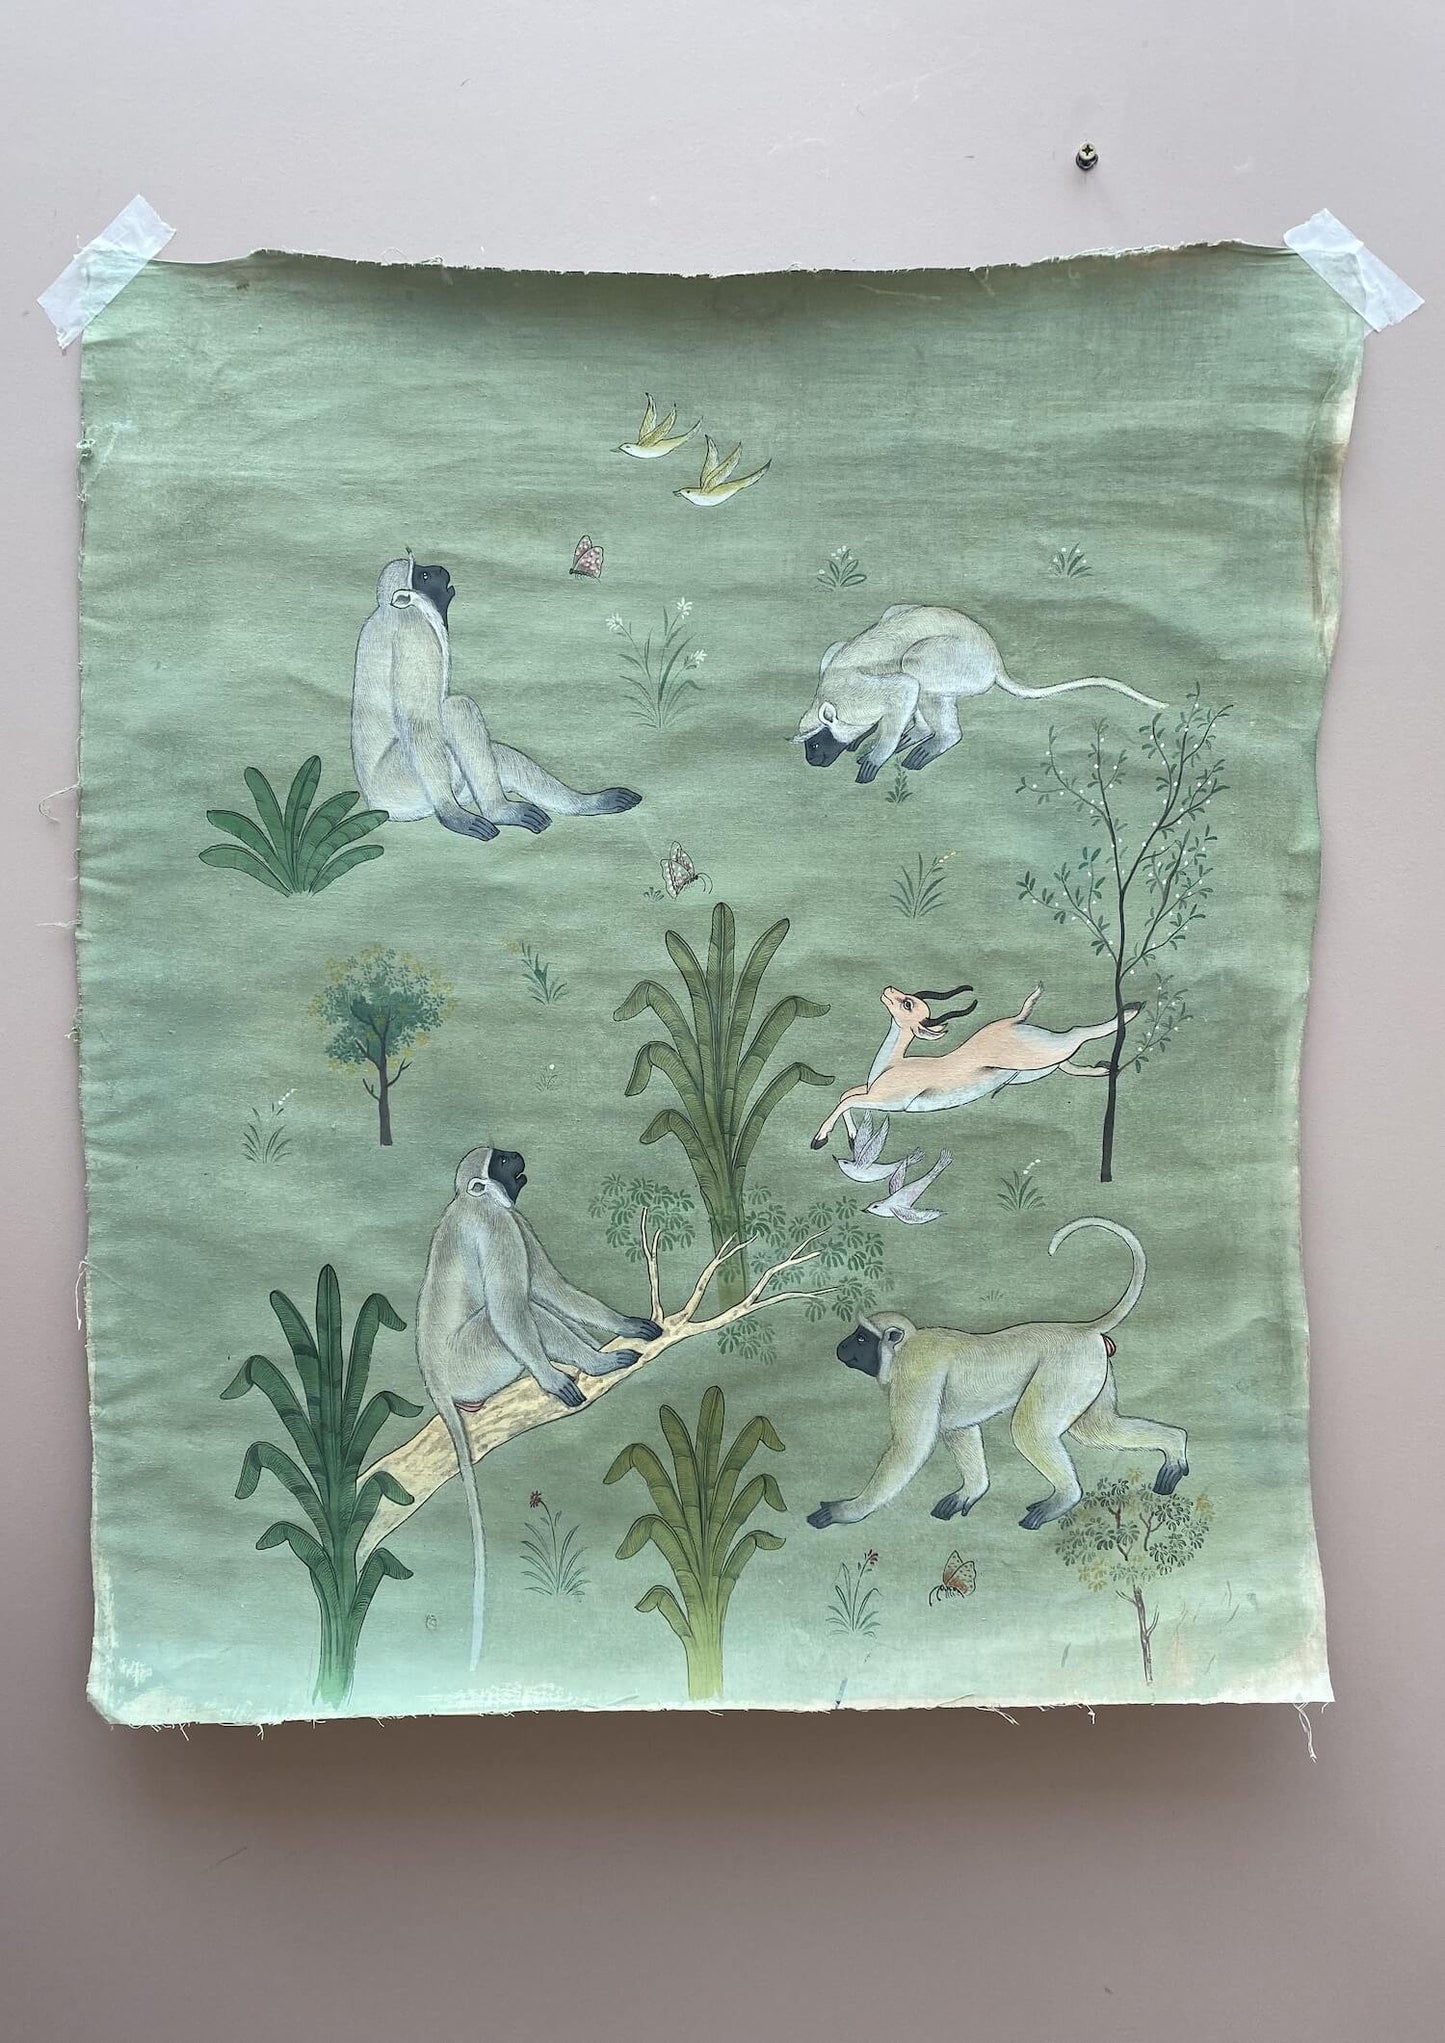 Pale green bespoke painting depicting monkeys, birds and antilopes as well as vegetation